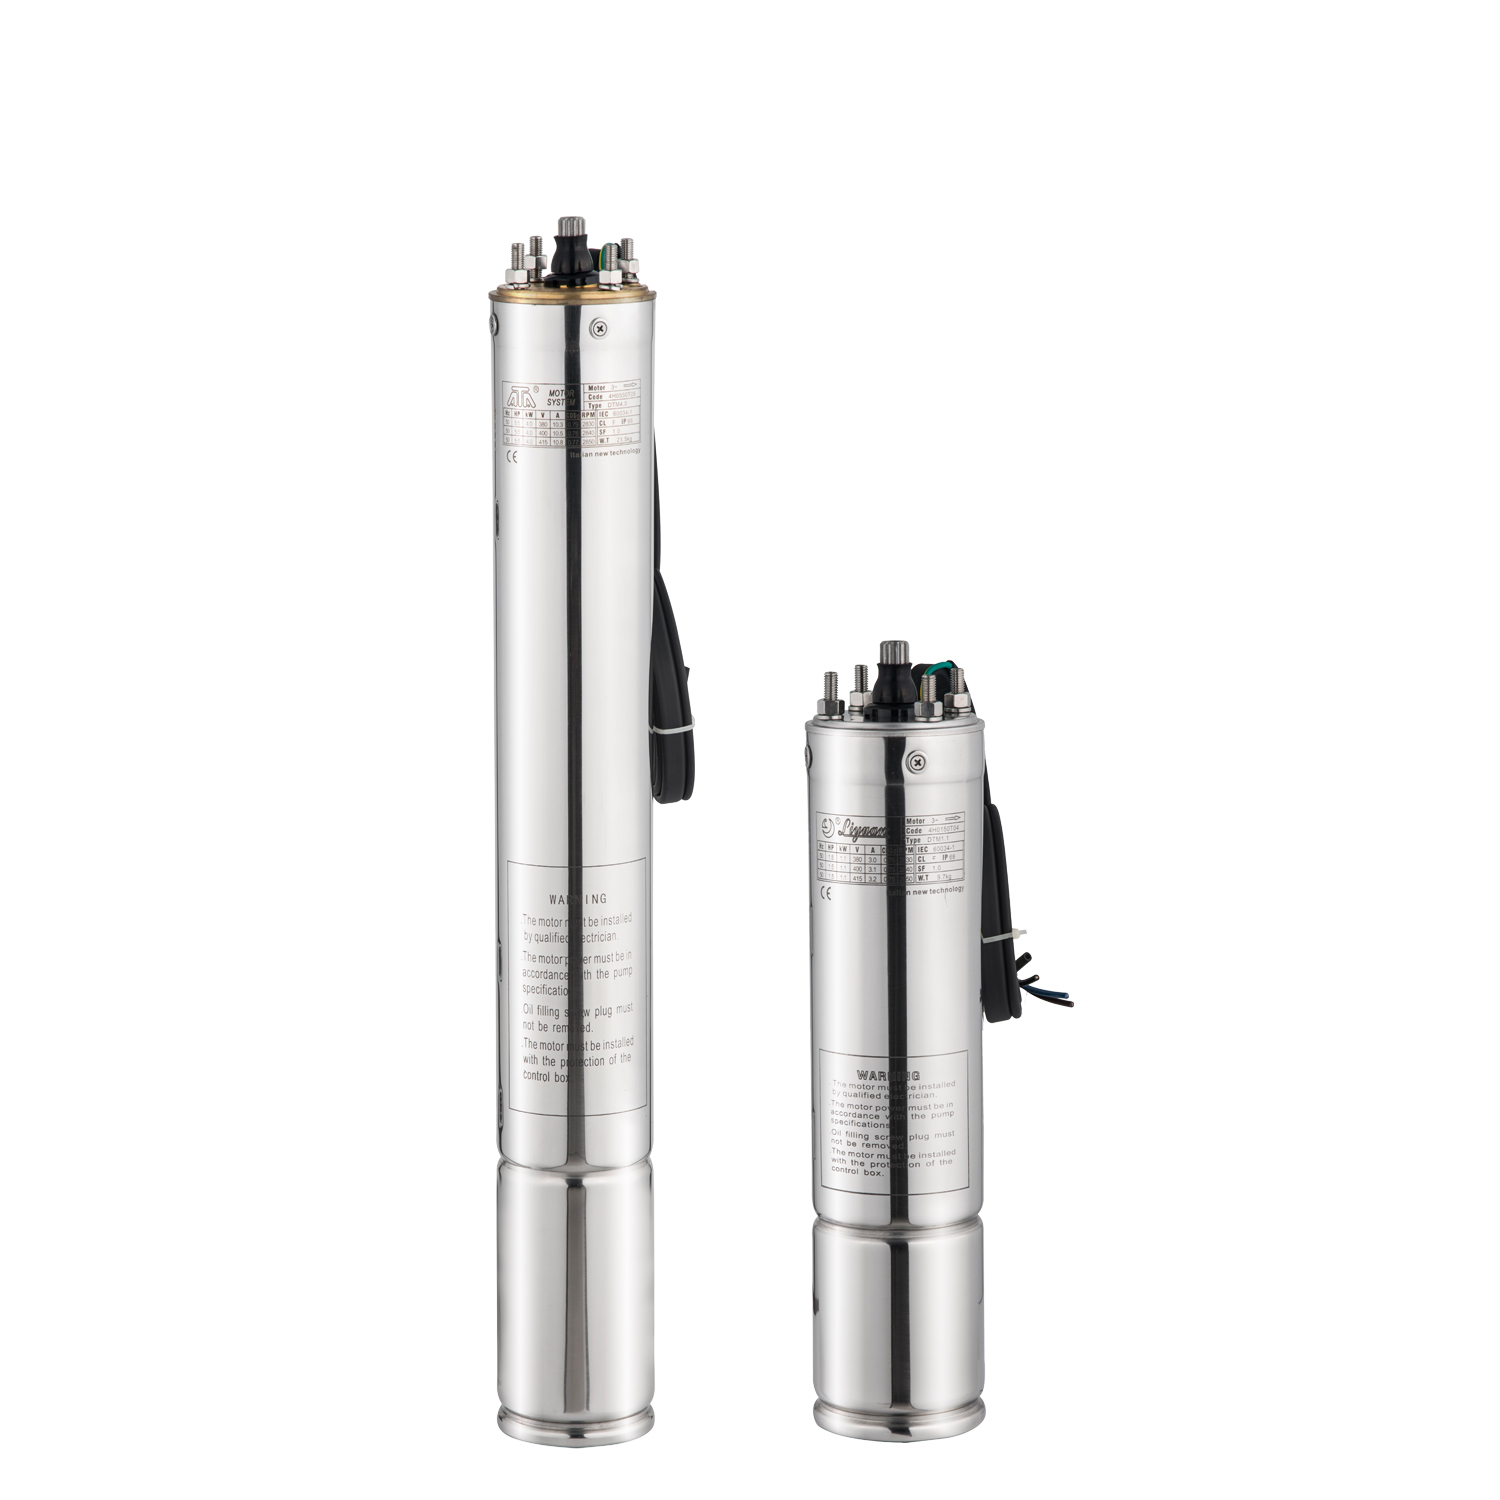  High Quality Deep Well Submersible Pump 4 Inch Deep Well Water Submersible Pump